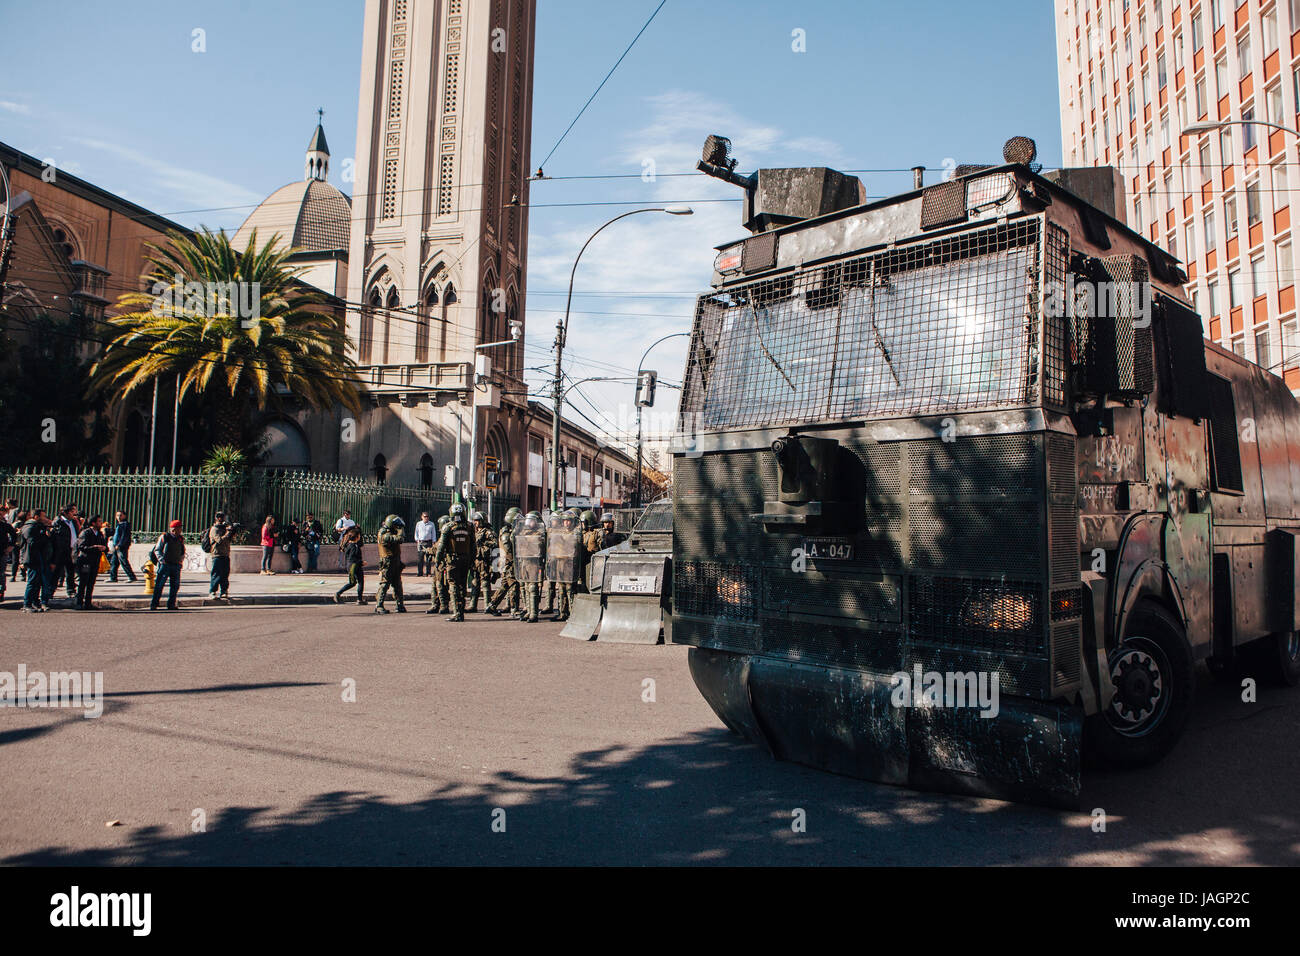 Valparaiso, Chile - June 01, 2017: Chilean riot police repress Protestants during a march on the streets of Valparaiso, following President Michelle B Stock Photo